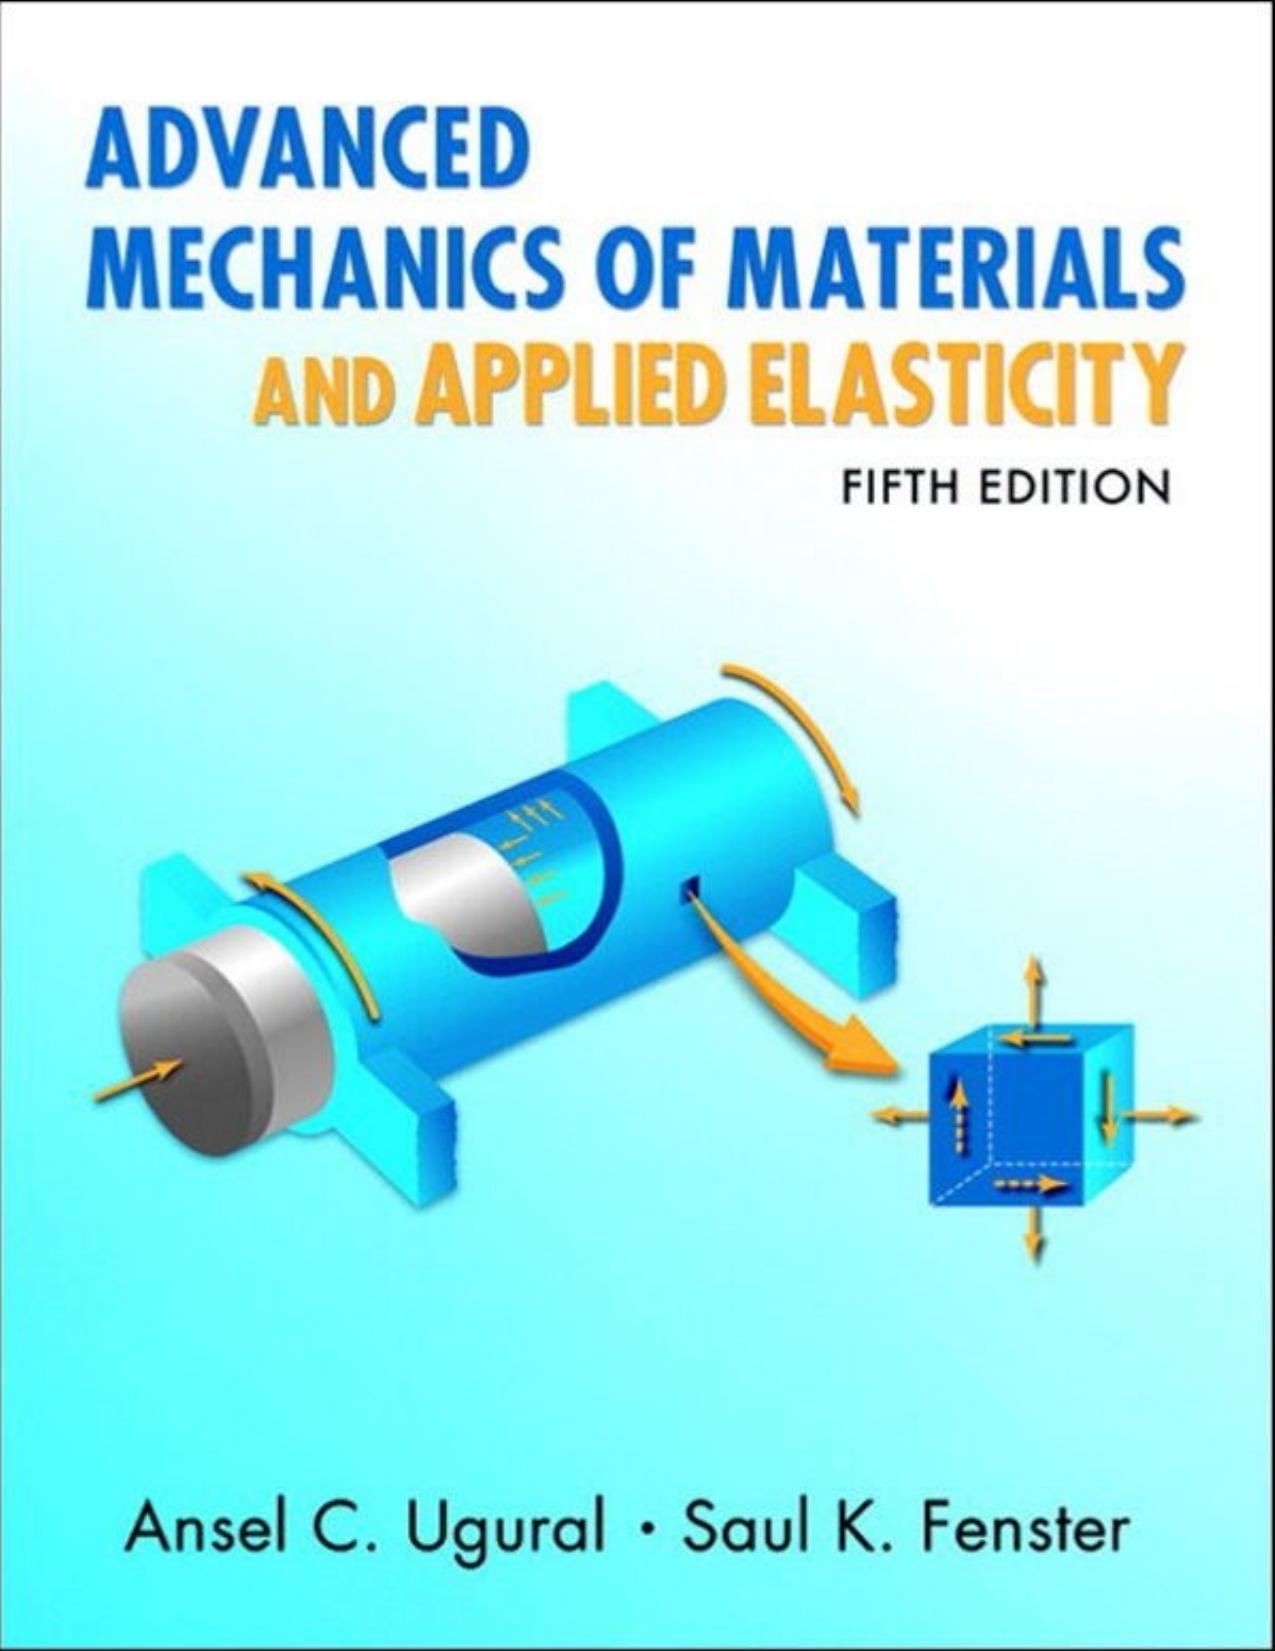 Advanced Mechanics of Materials and Applied Elasticity 5th Edition by Ansel C. Ugural , Saul K. Fenster